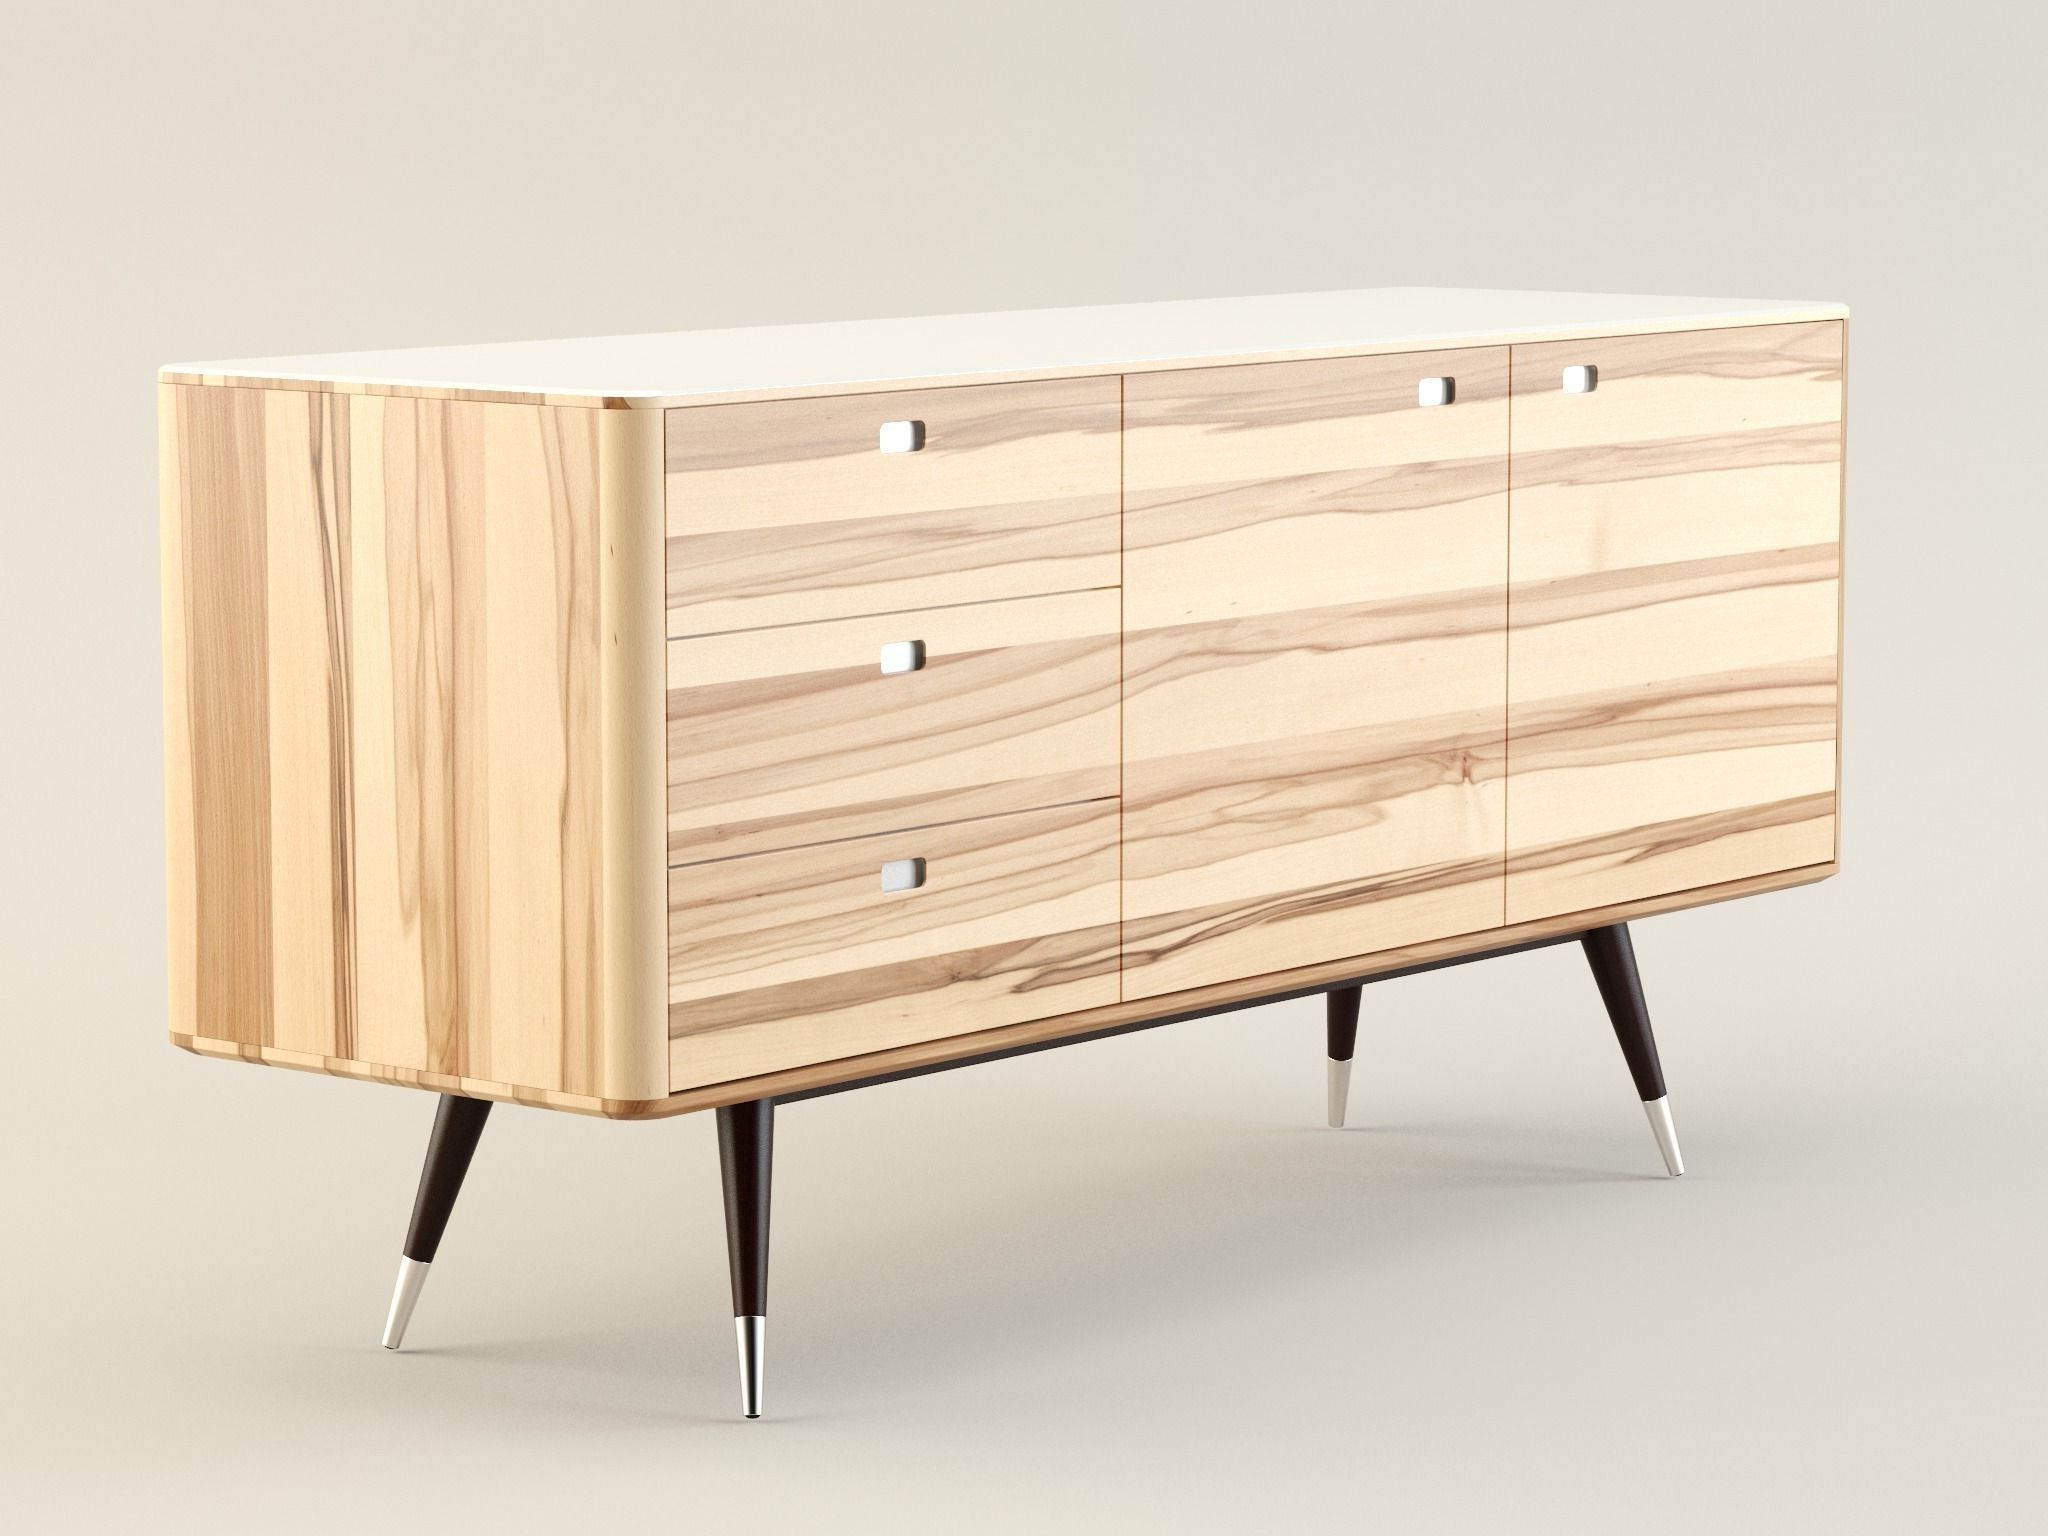 Danish Retro Sideboard 3d | Cgtrader With Regard To Danish Retro Sideboards (View 1 of 20)